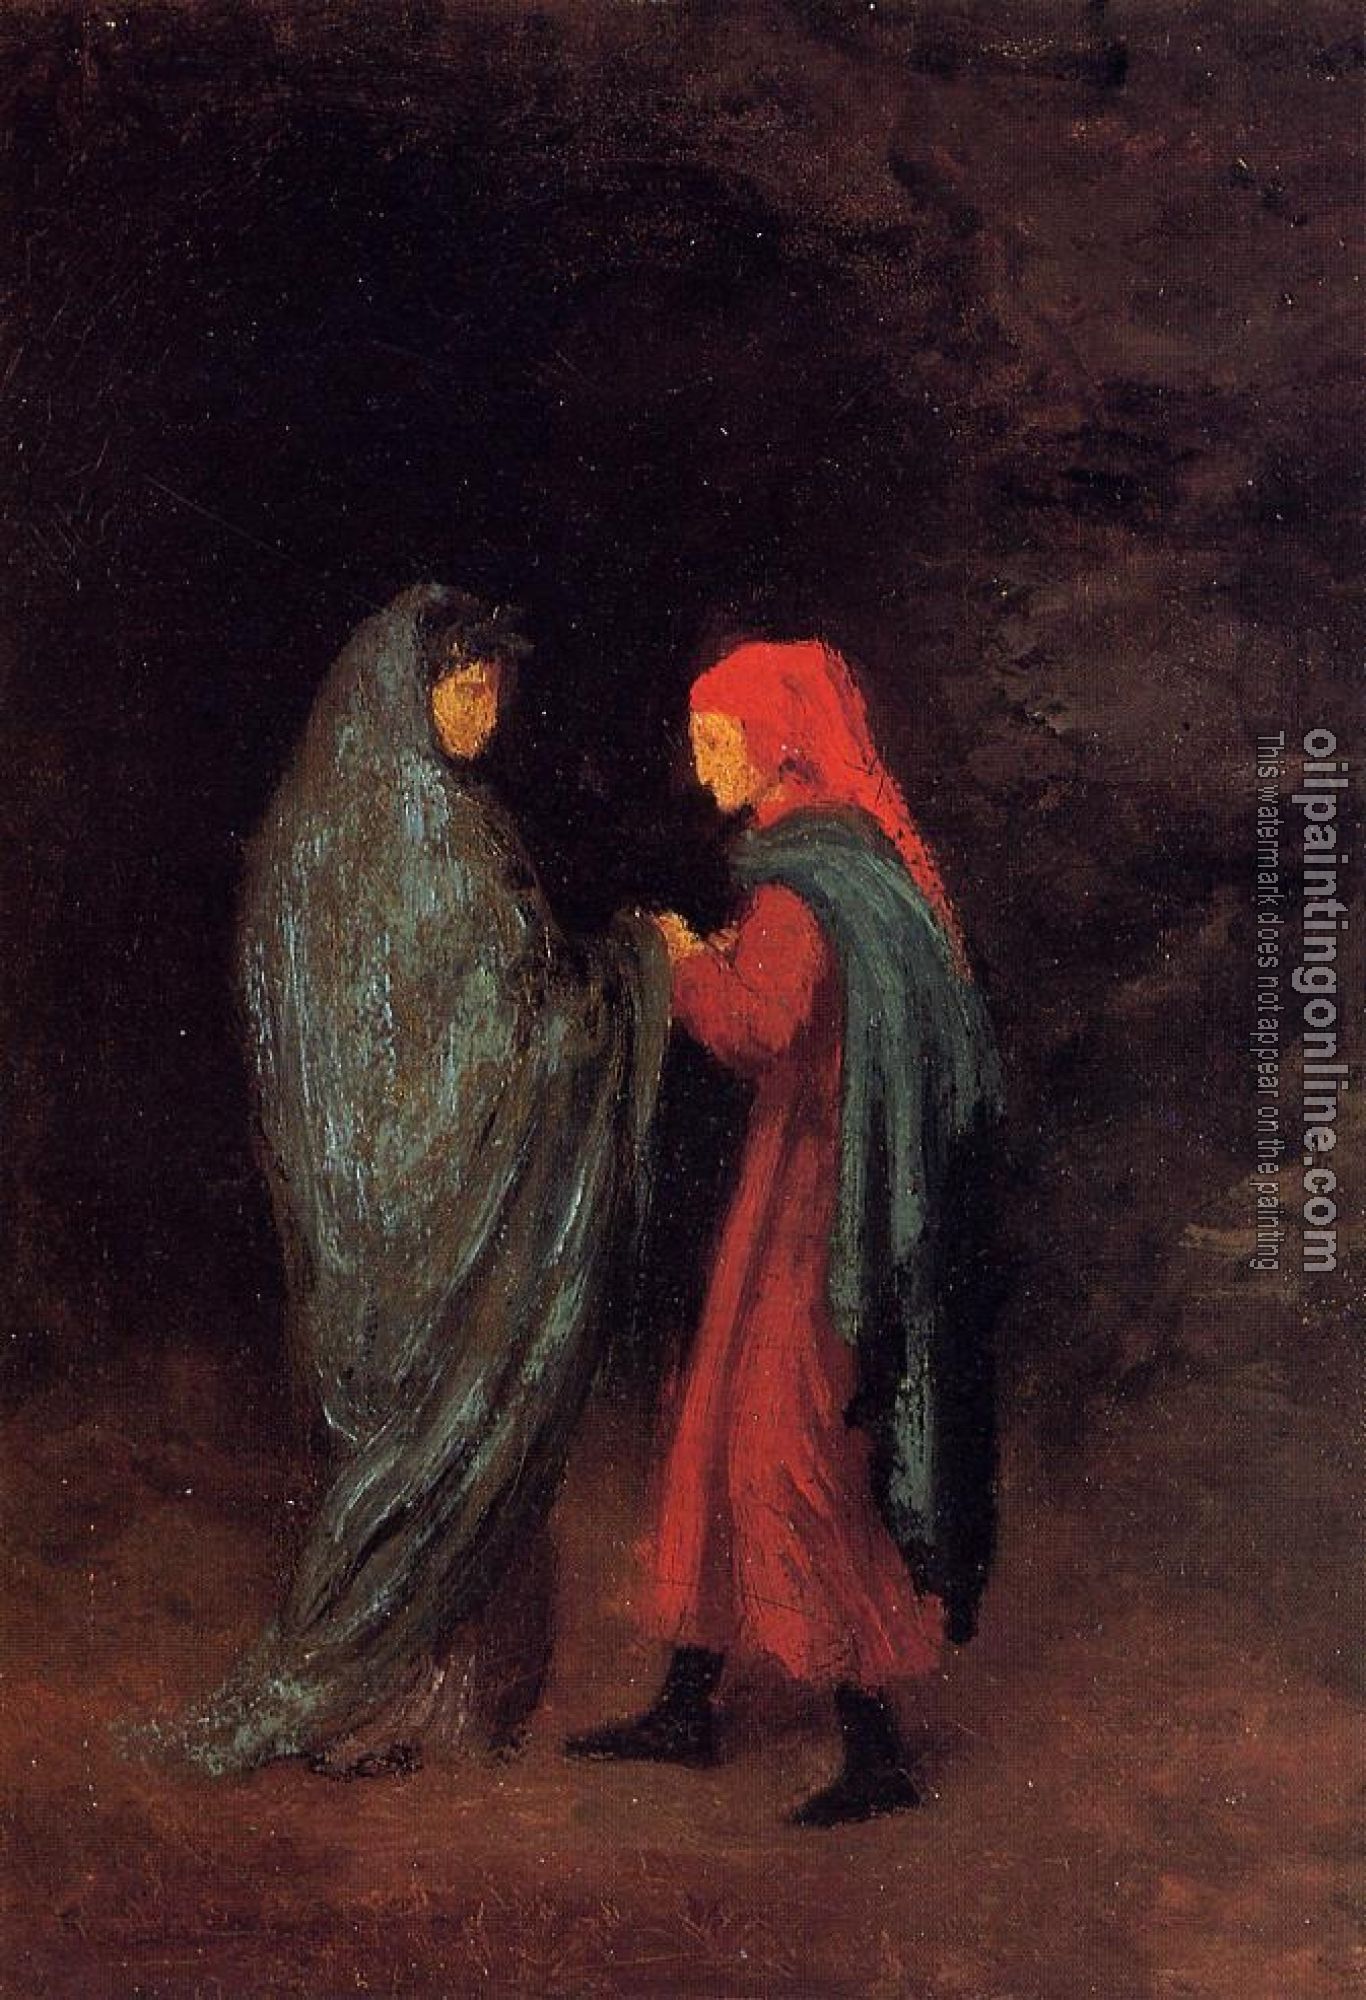 Degas, Edgar - Dante and Virgil at the Entrance to Hell